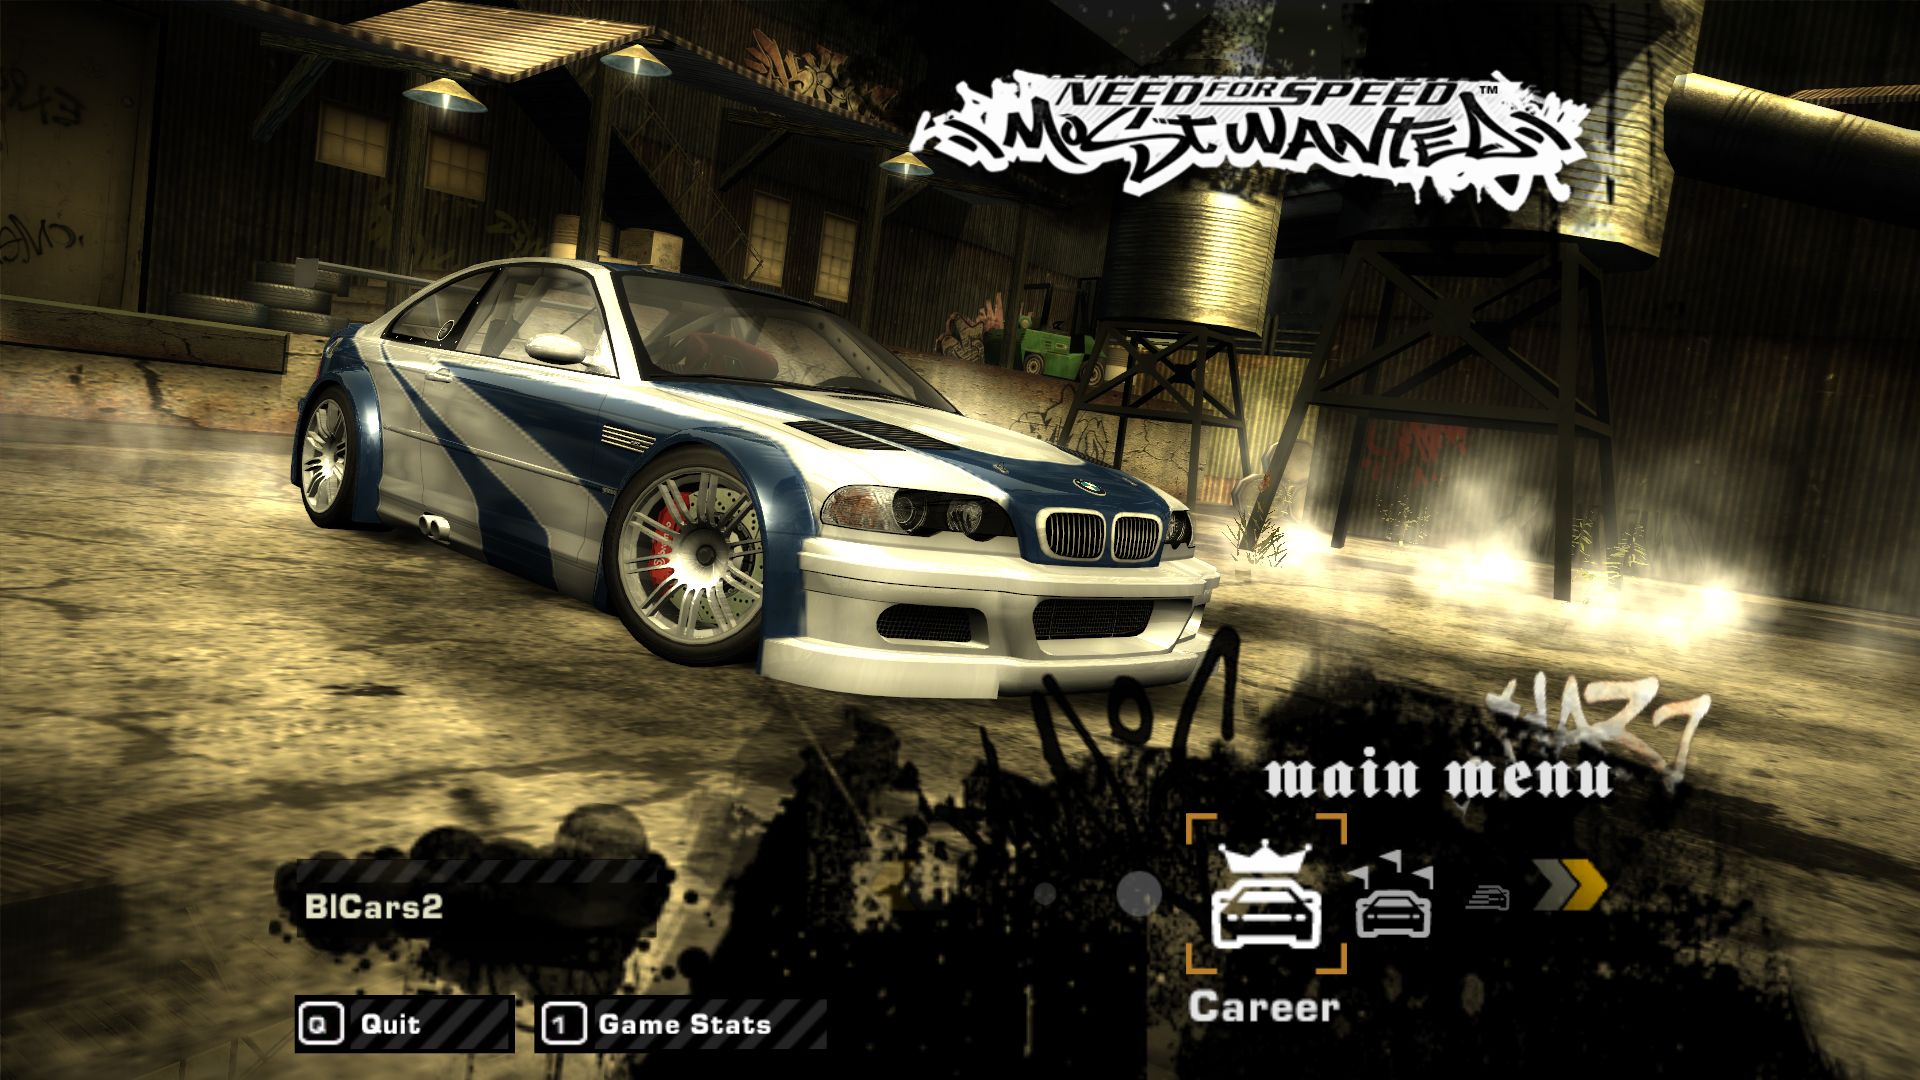 The menu in Most Wanted, showing the legendary M3 GTR